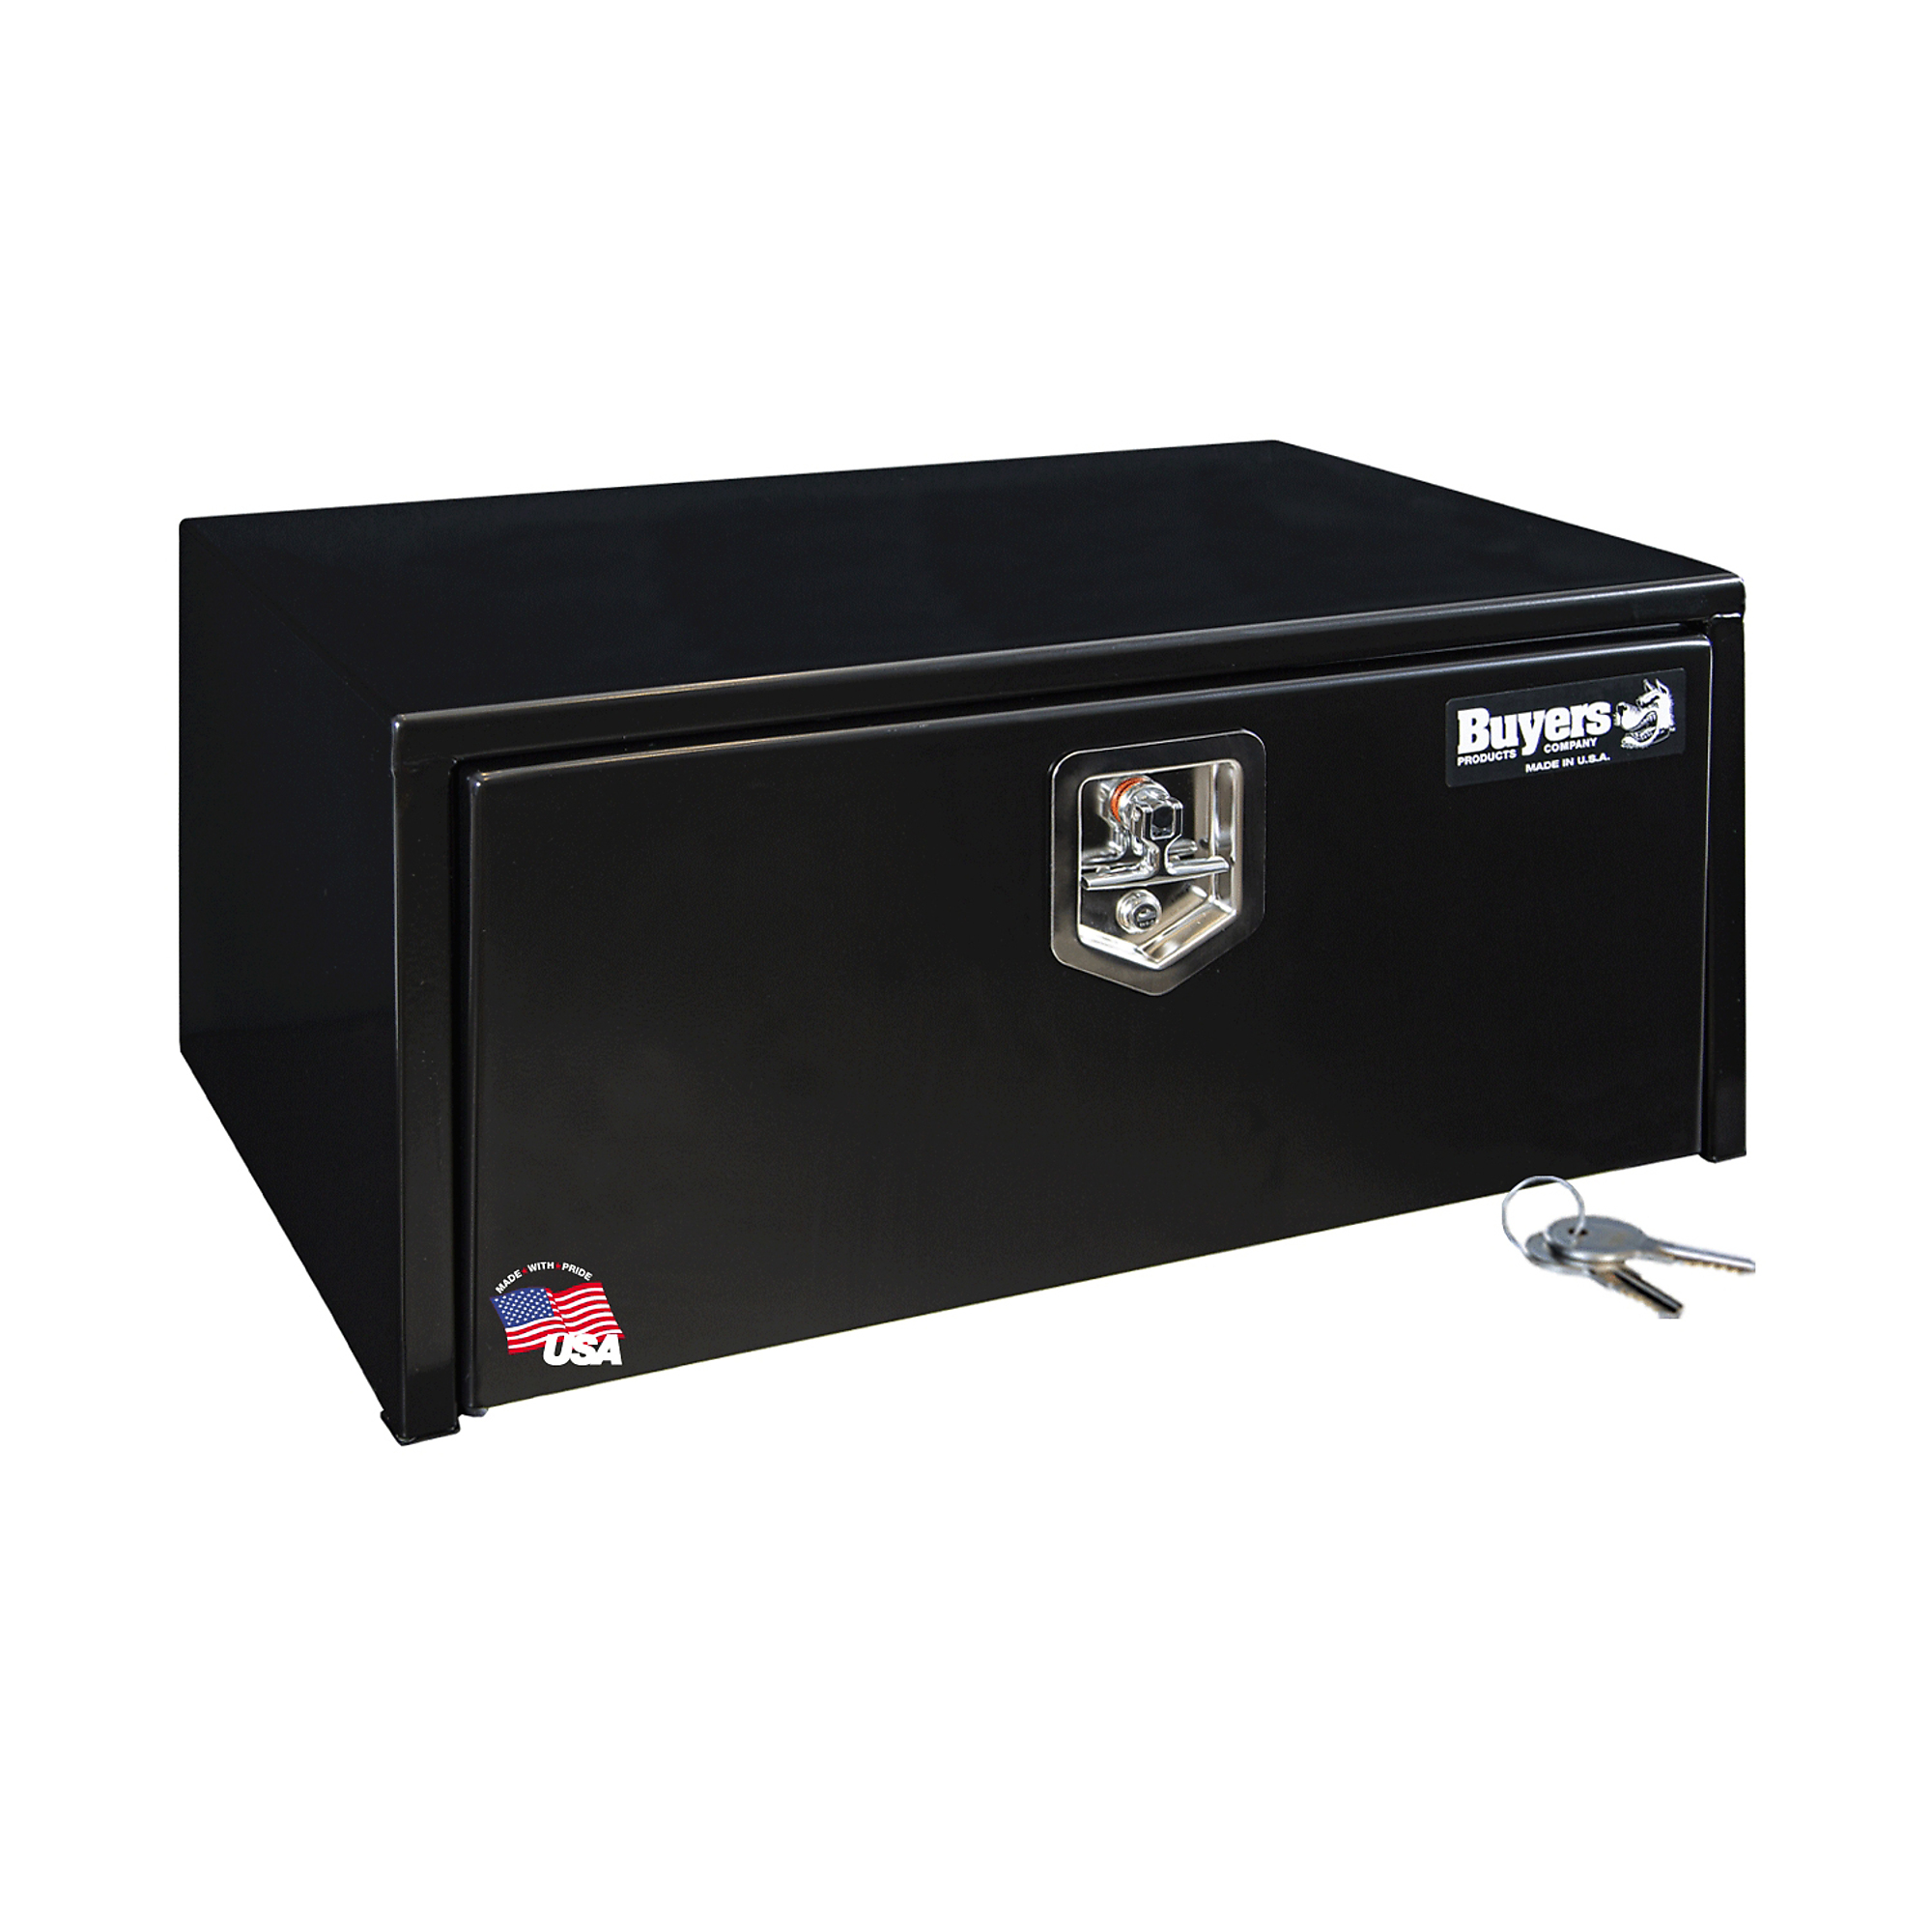 Buyers Products Underbody Truck Box, 30Inch Carbon Steel, Glossy Black, Model 1703303